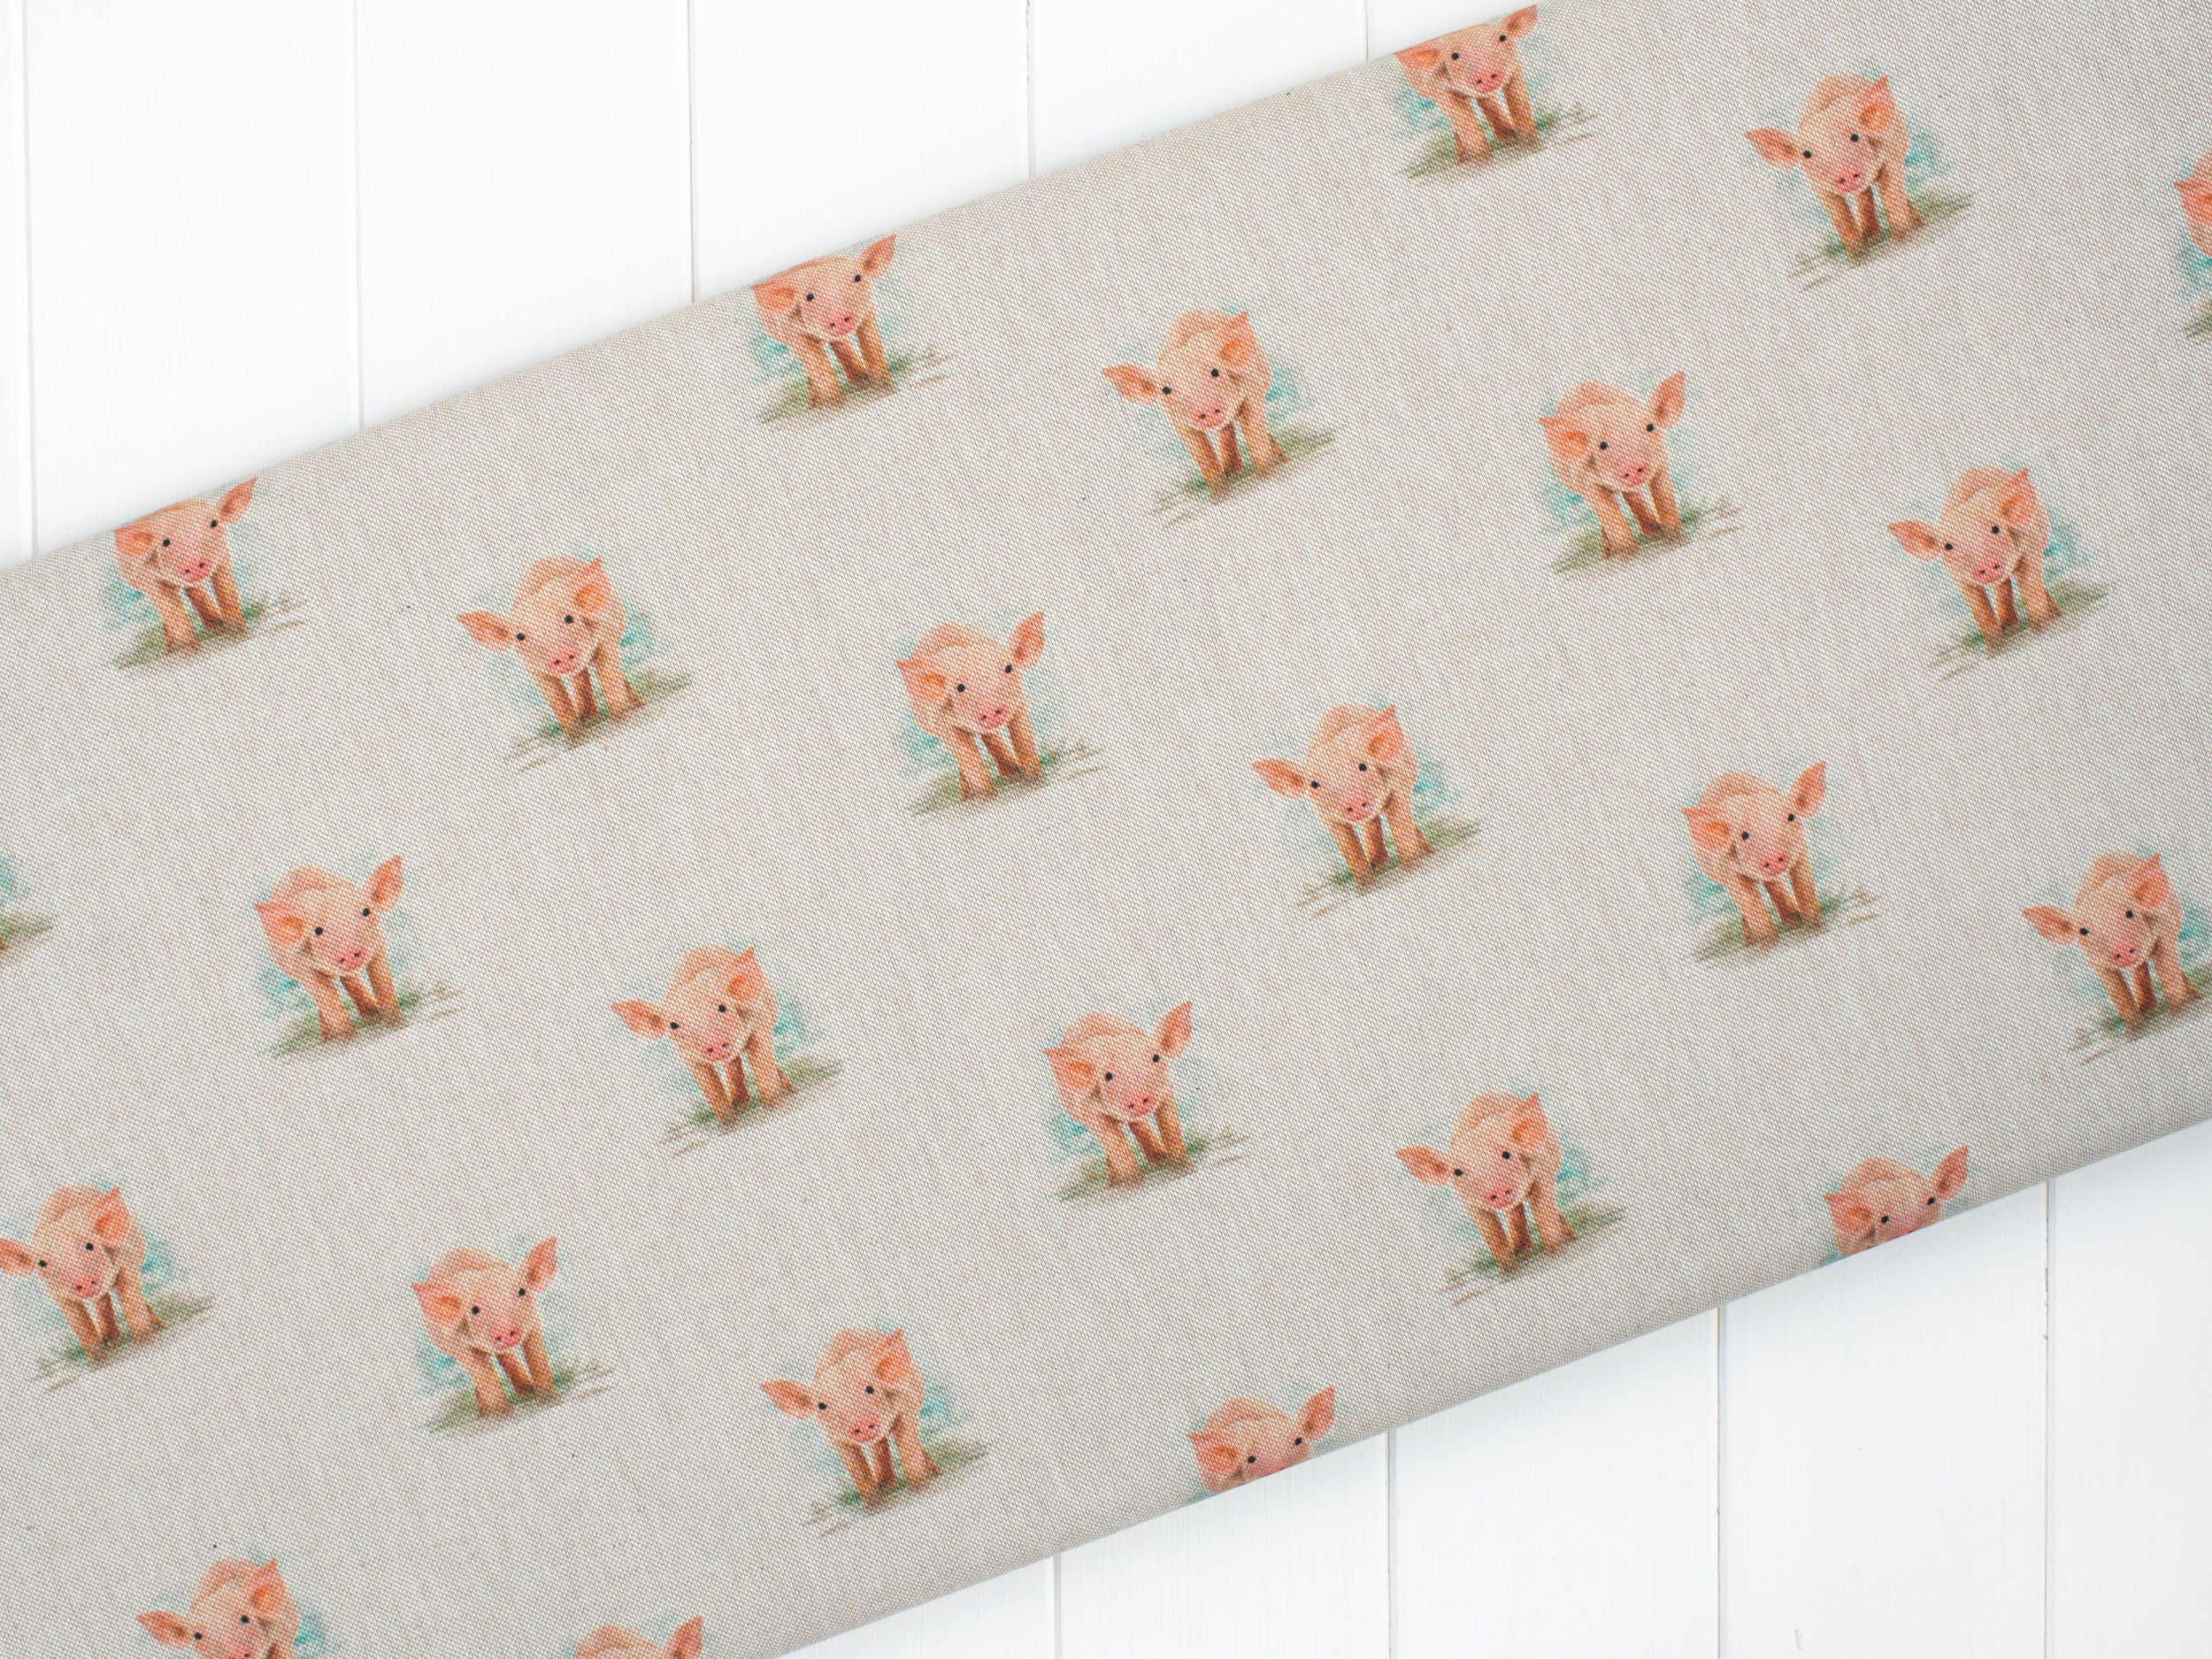 digitally printed pig on a cotton rich light upholstery fabric